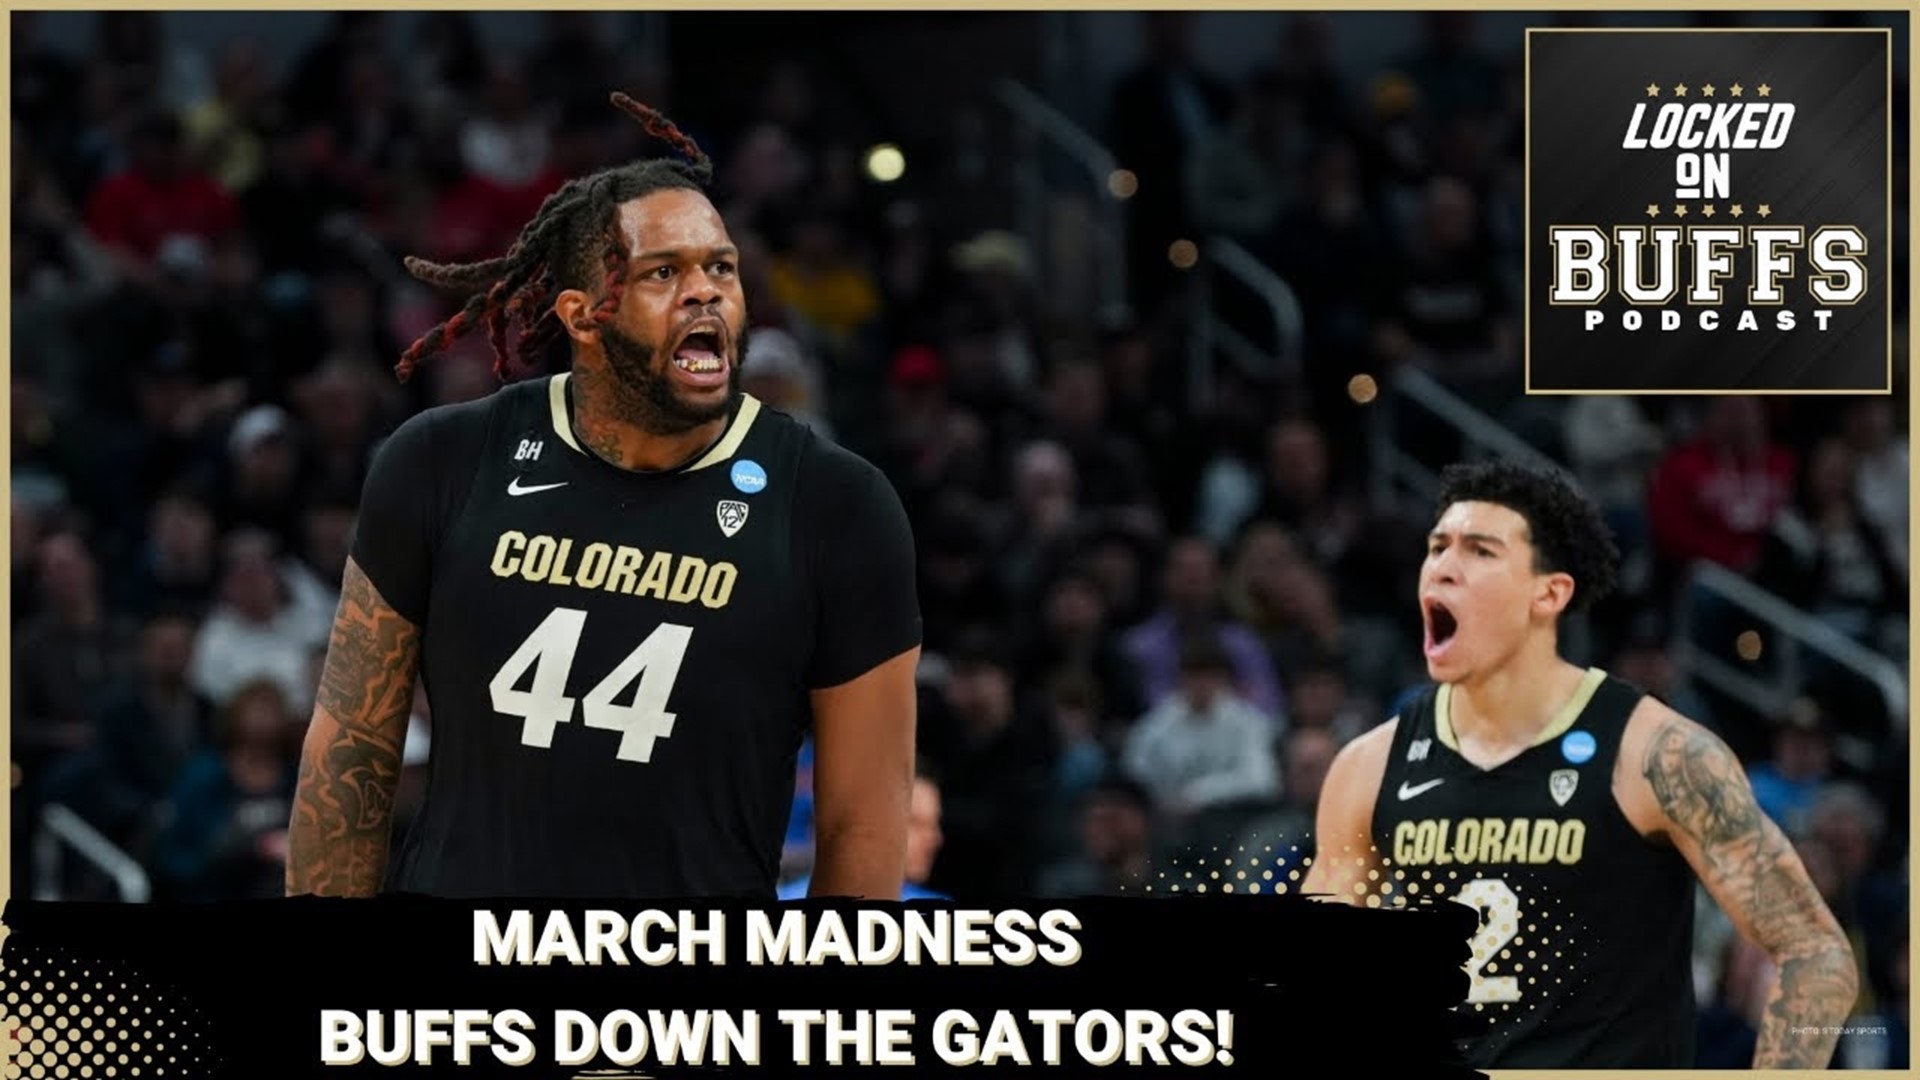 The Colorado Buffaloes were able to survive and advance against the Florida Gators thanks to a clutch shot by KJ Simpson.